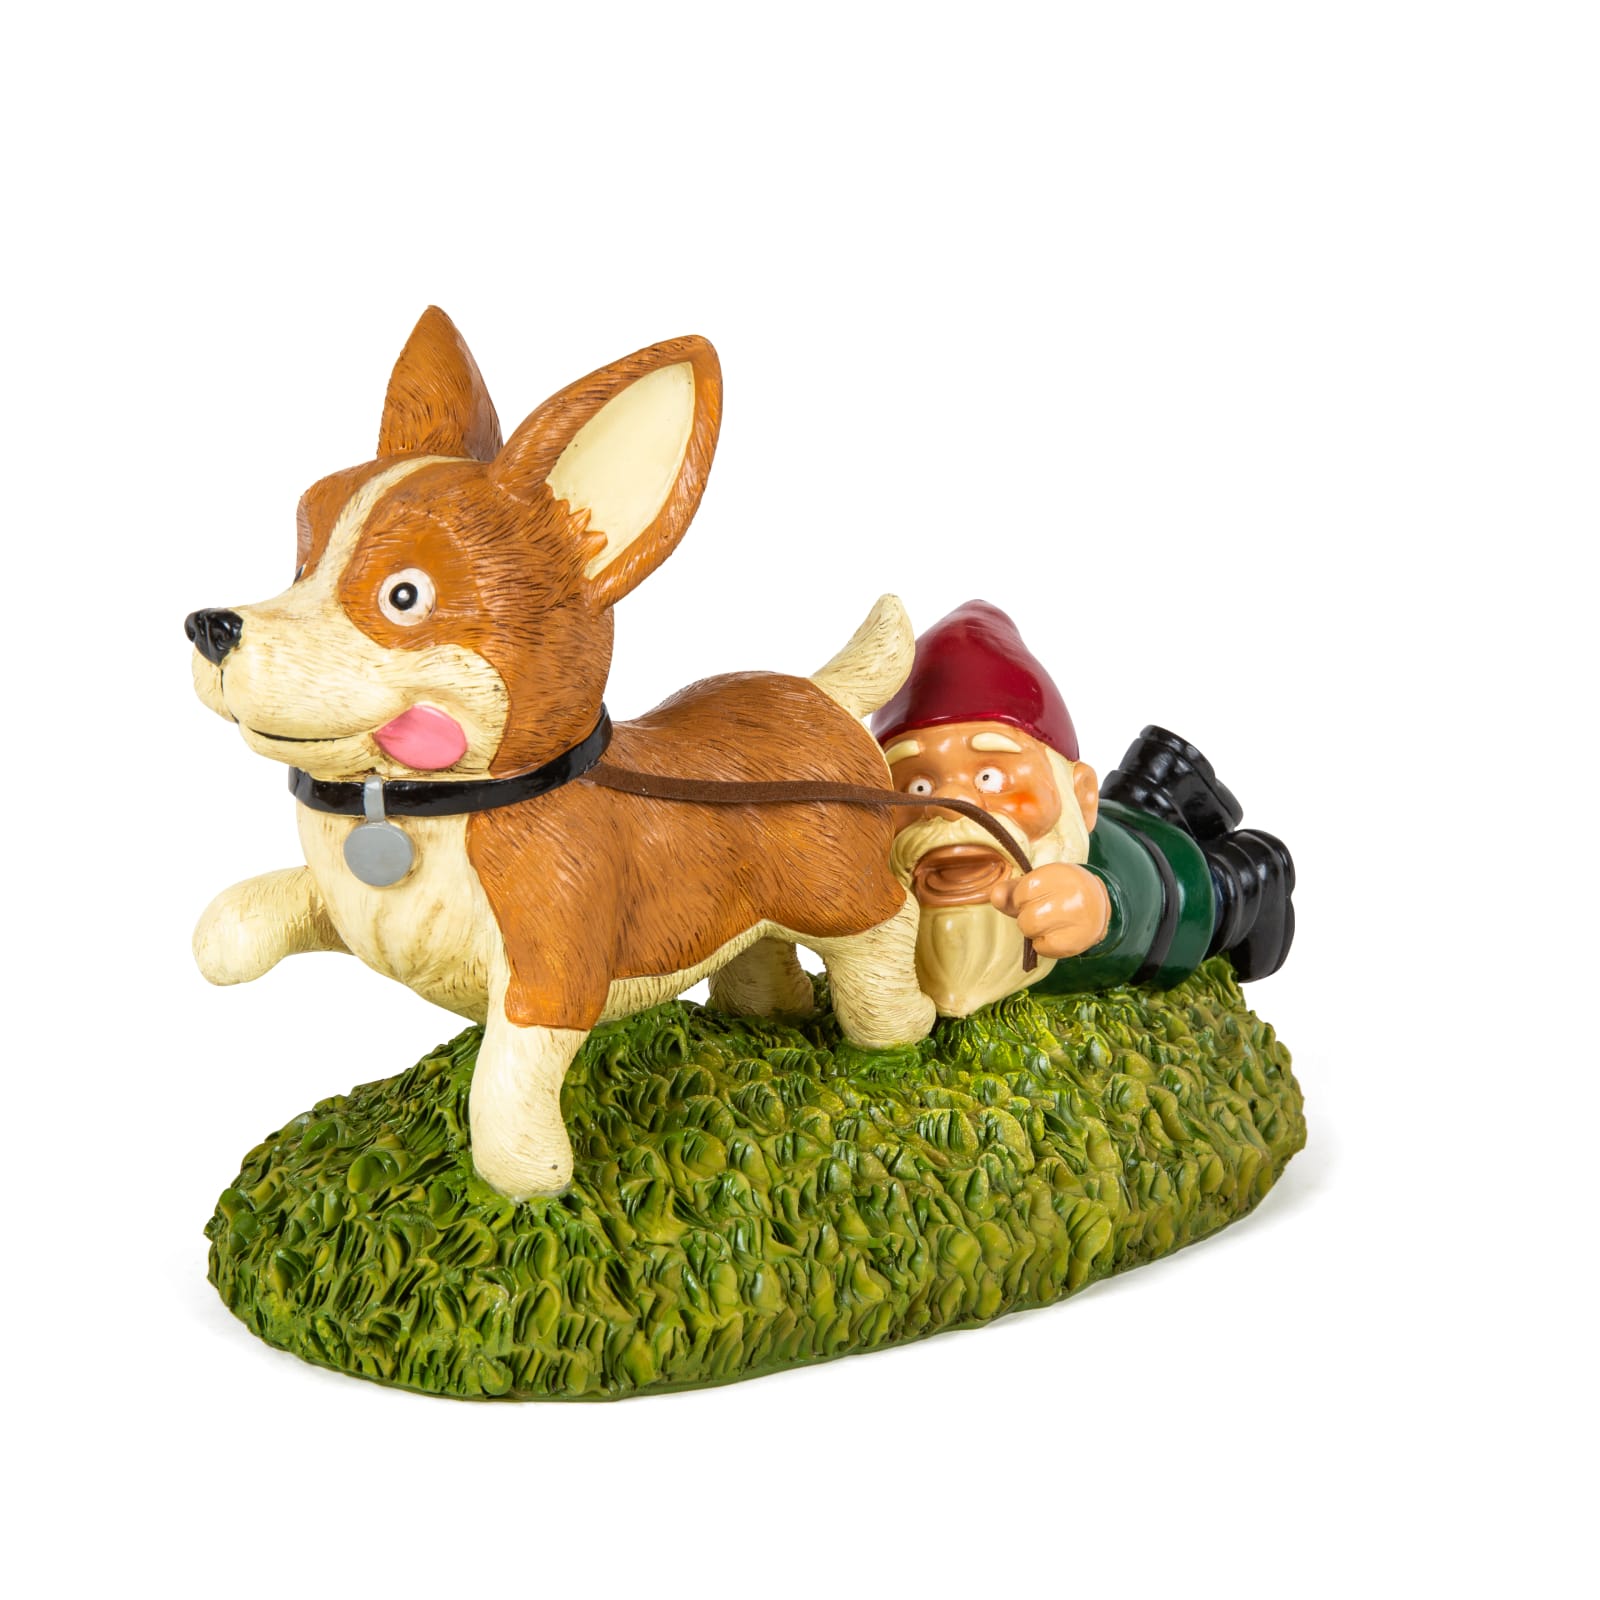 Giddy Up Doggy Gnome